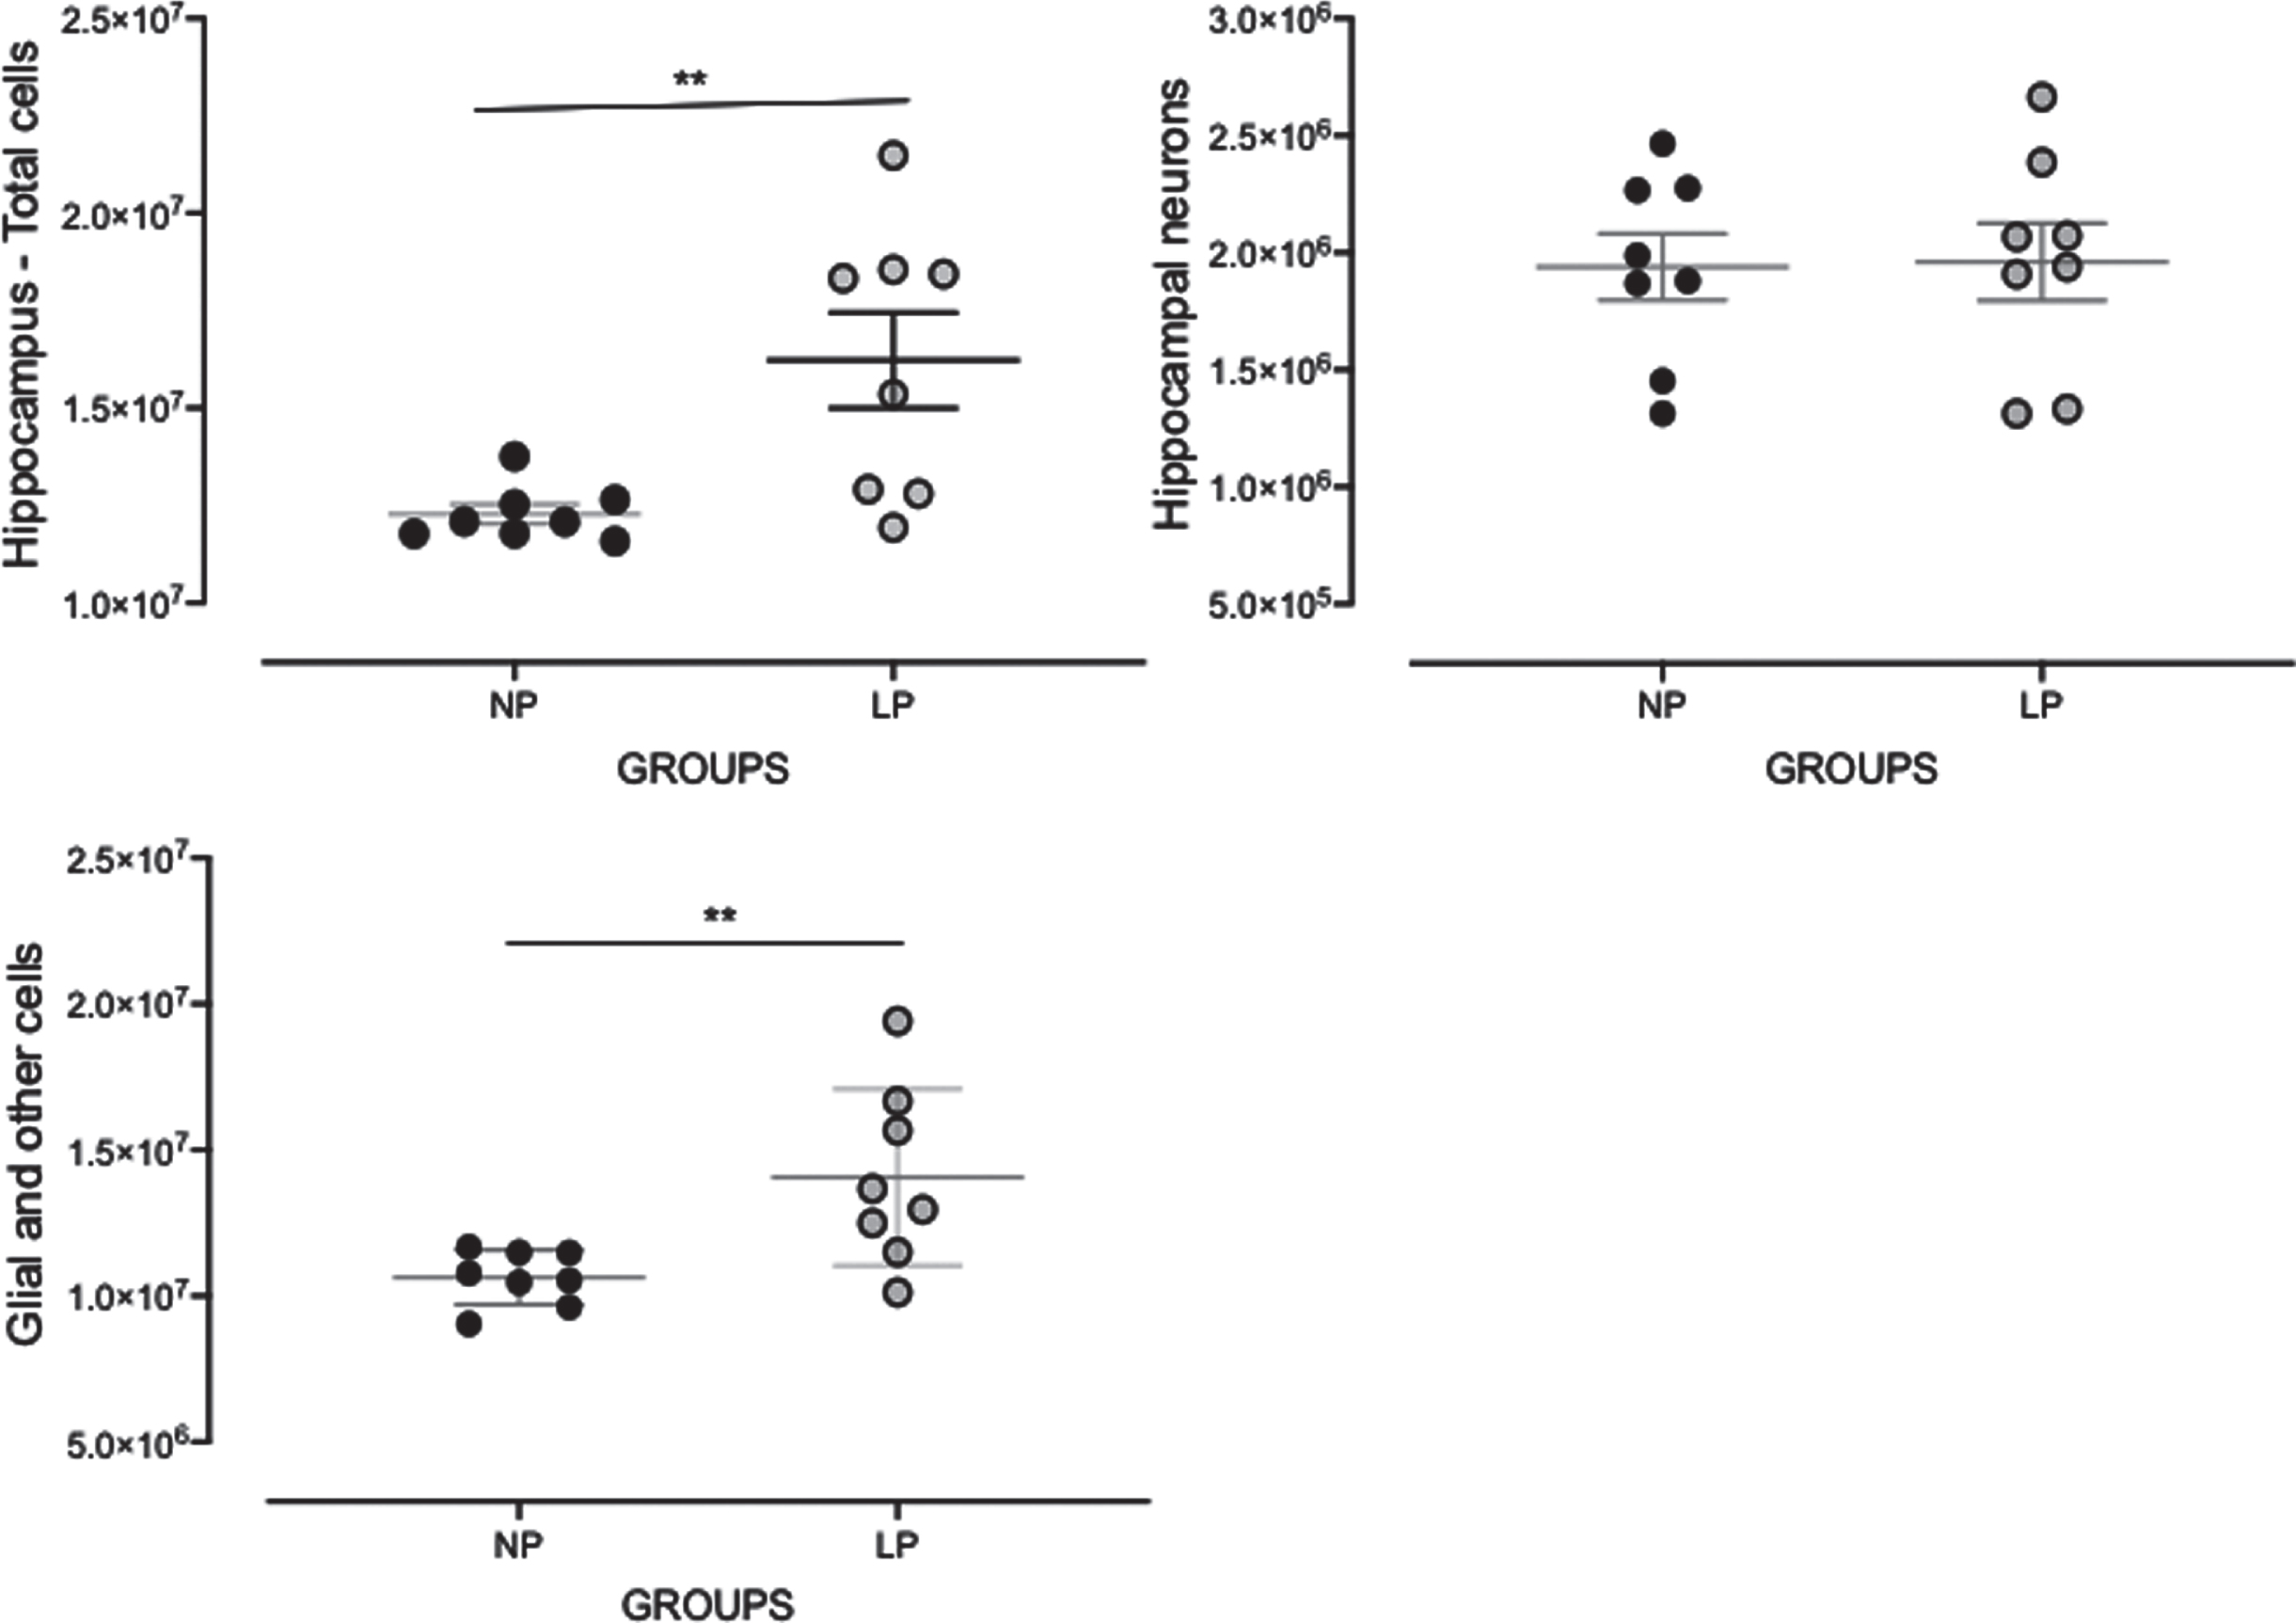 Effects of maternal protein restriction on 88-week-old LP (n = 5) compared to age-matched NP (n = 5) offspring on whole hippocampal cell, neurons, and non-neuronal cell quantifications. Results are depicted as scatter dot-plot and are expressed as means±SEM; comparisons involving only two means within or between groups were performed using a Student’s t-test. The level of significance was set at *p < 0.05.